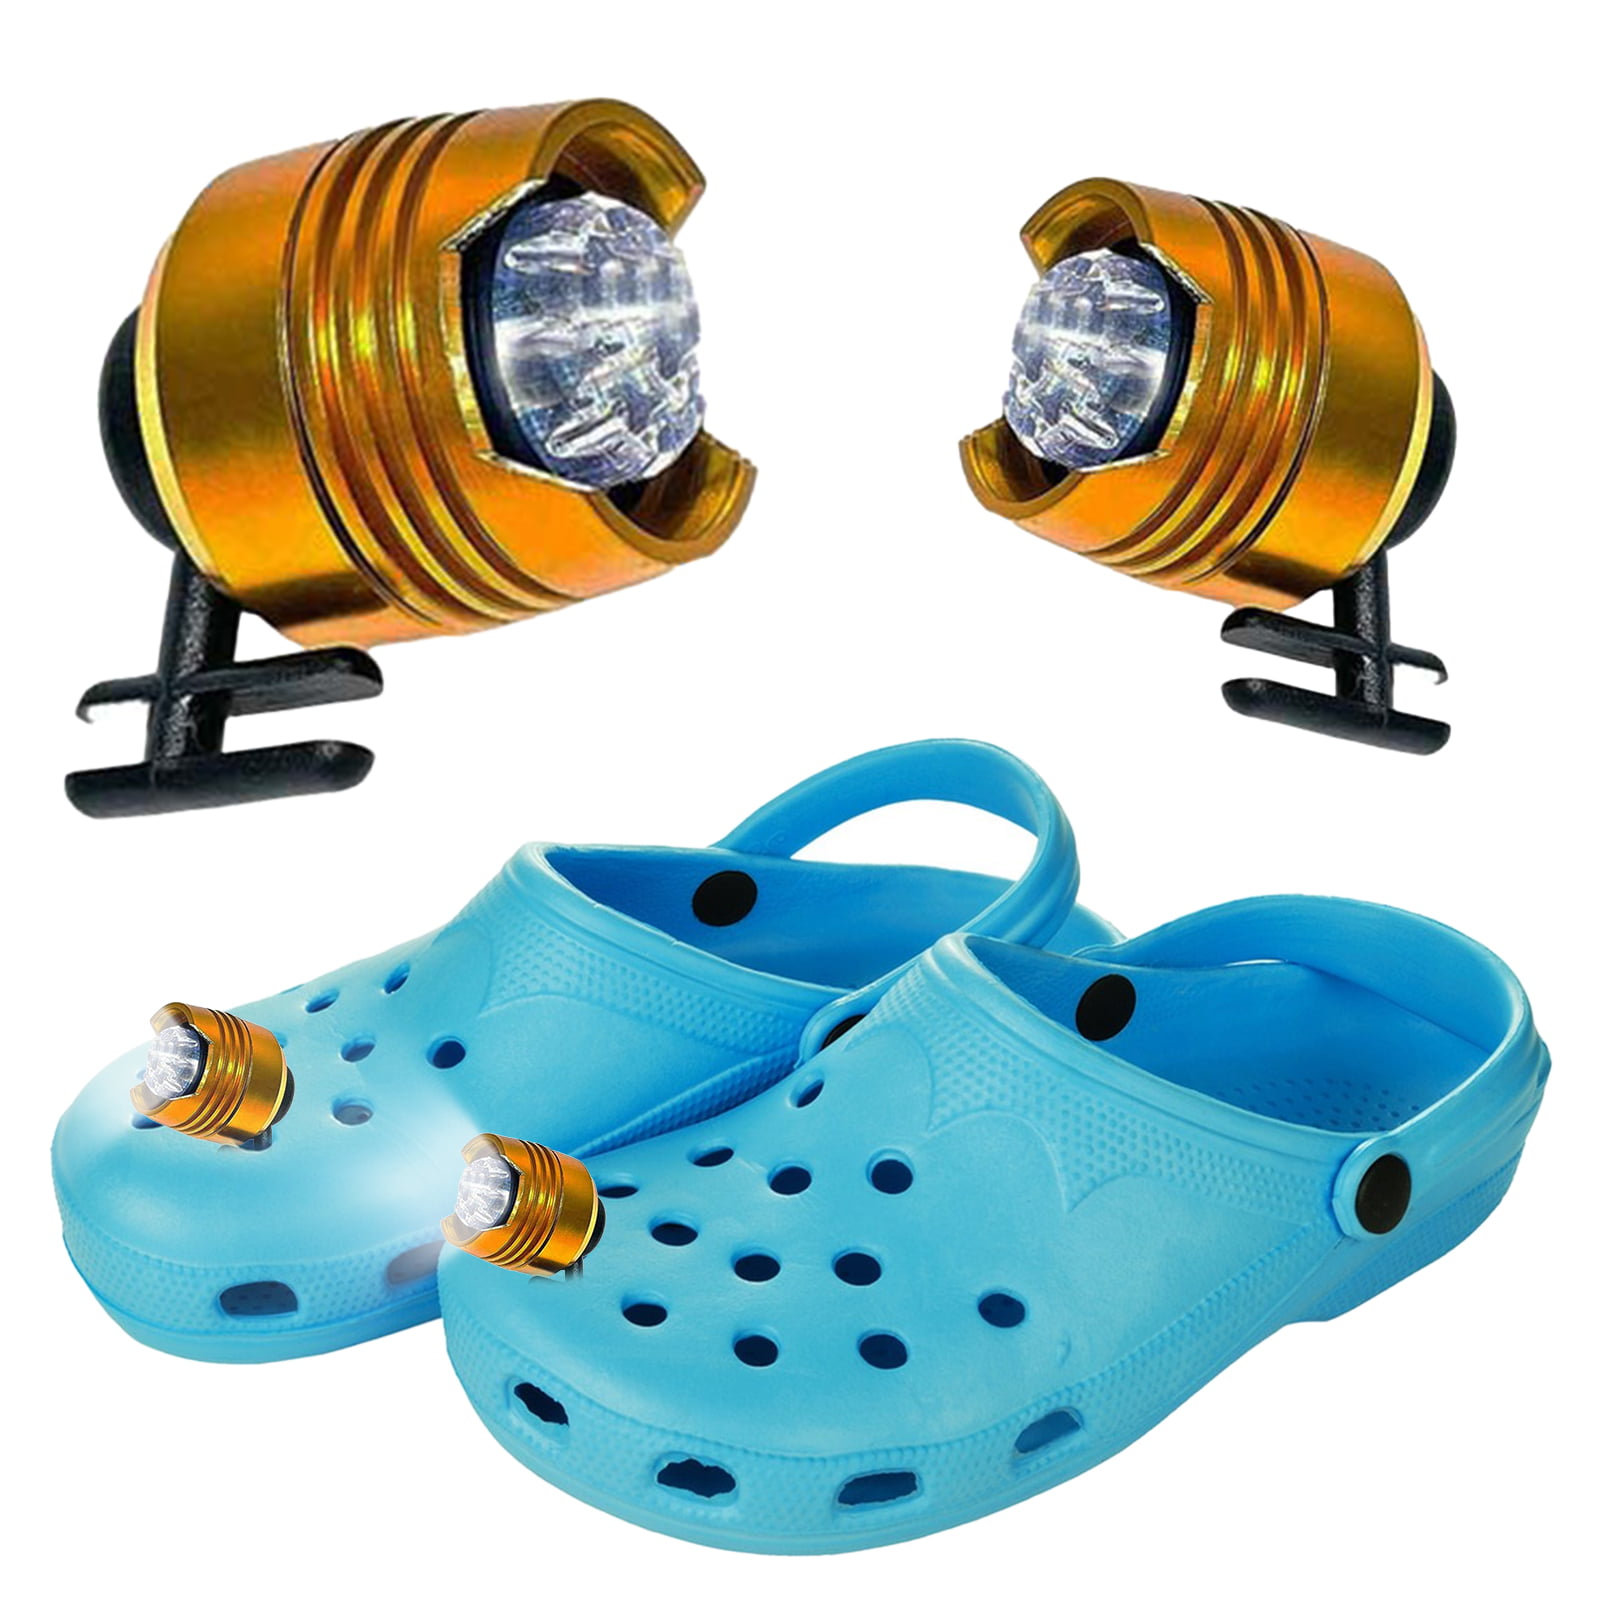 Headlights for Croc, 2PCS Clogs Shoes Light, Waterproof with 3 Light ...